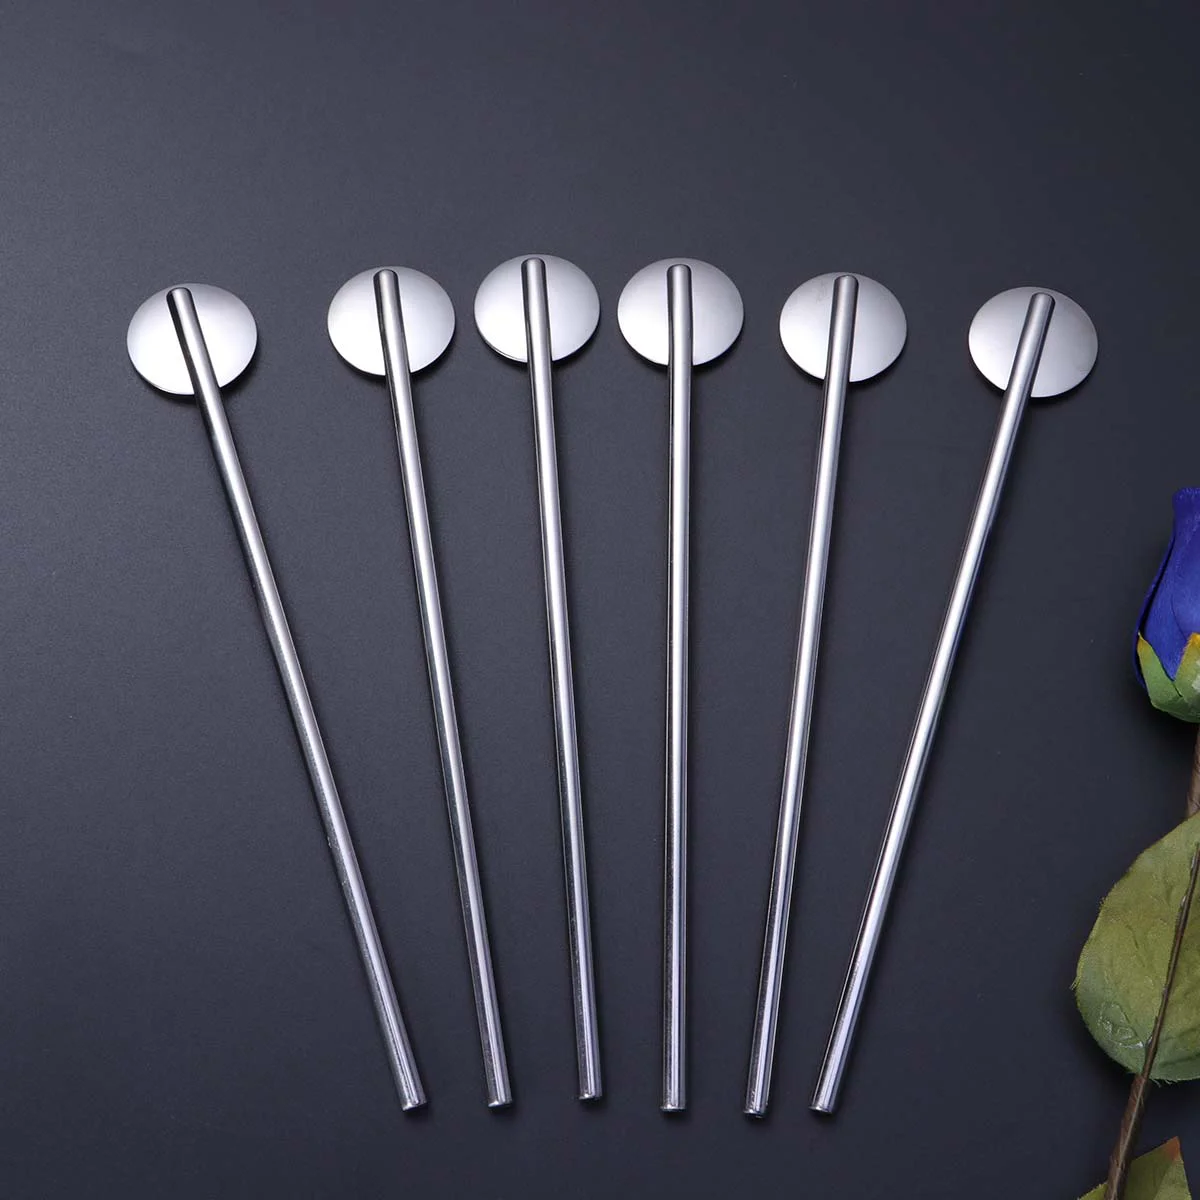 

Pcs/Pack Stainless Steel Oval Shape Metal Drinking Spoon Straw Reusable Straws Cocktail Spoons Filter Set Kitchen Tableware